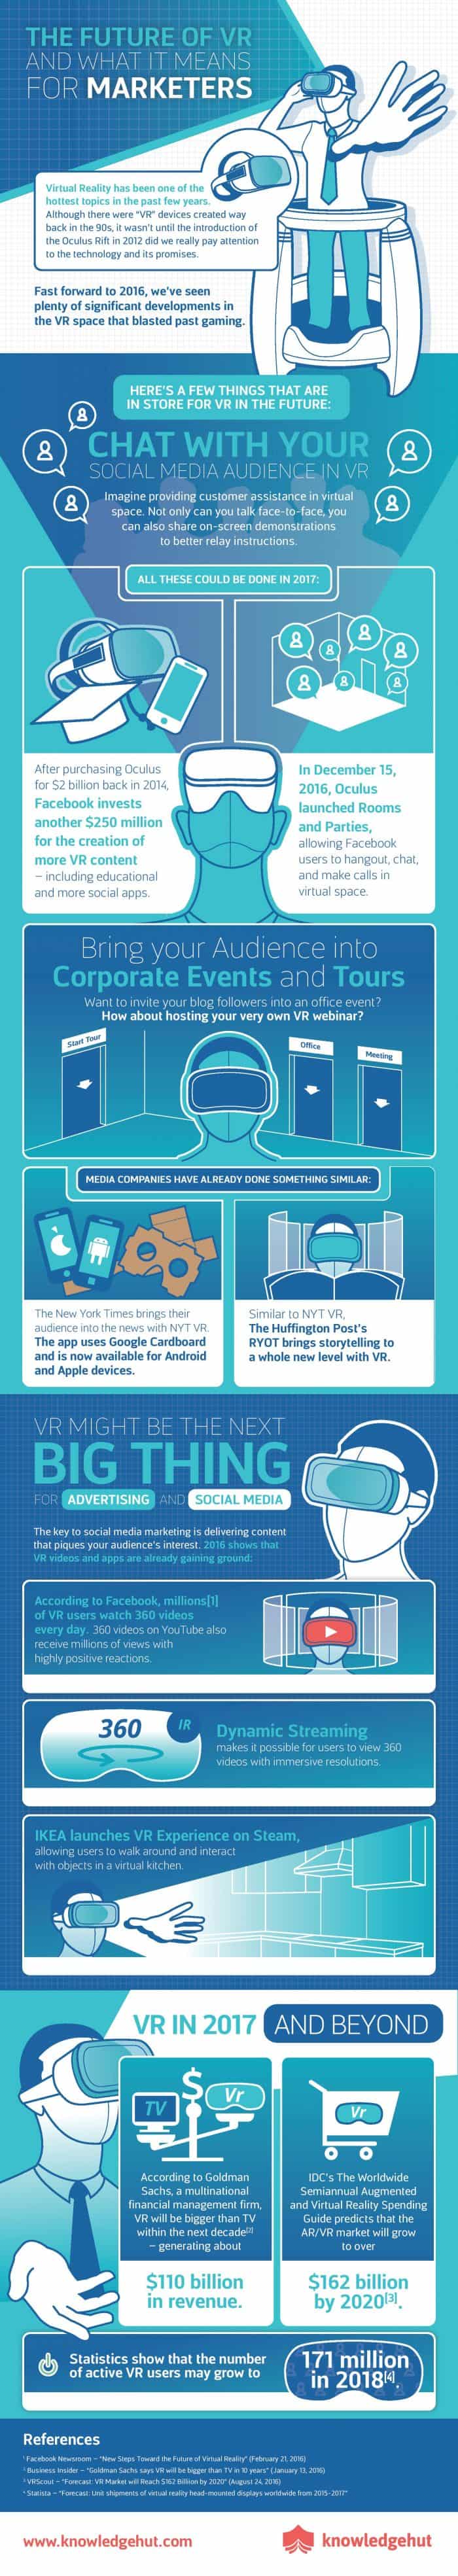 Infographic showing the probable future of VR and its possibilities.